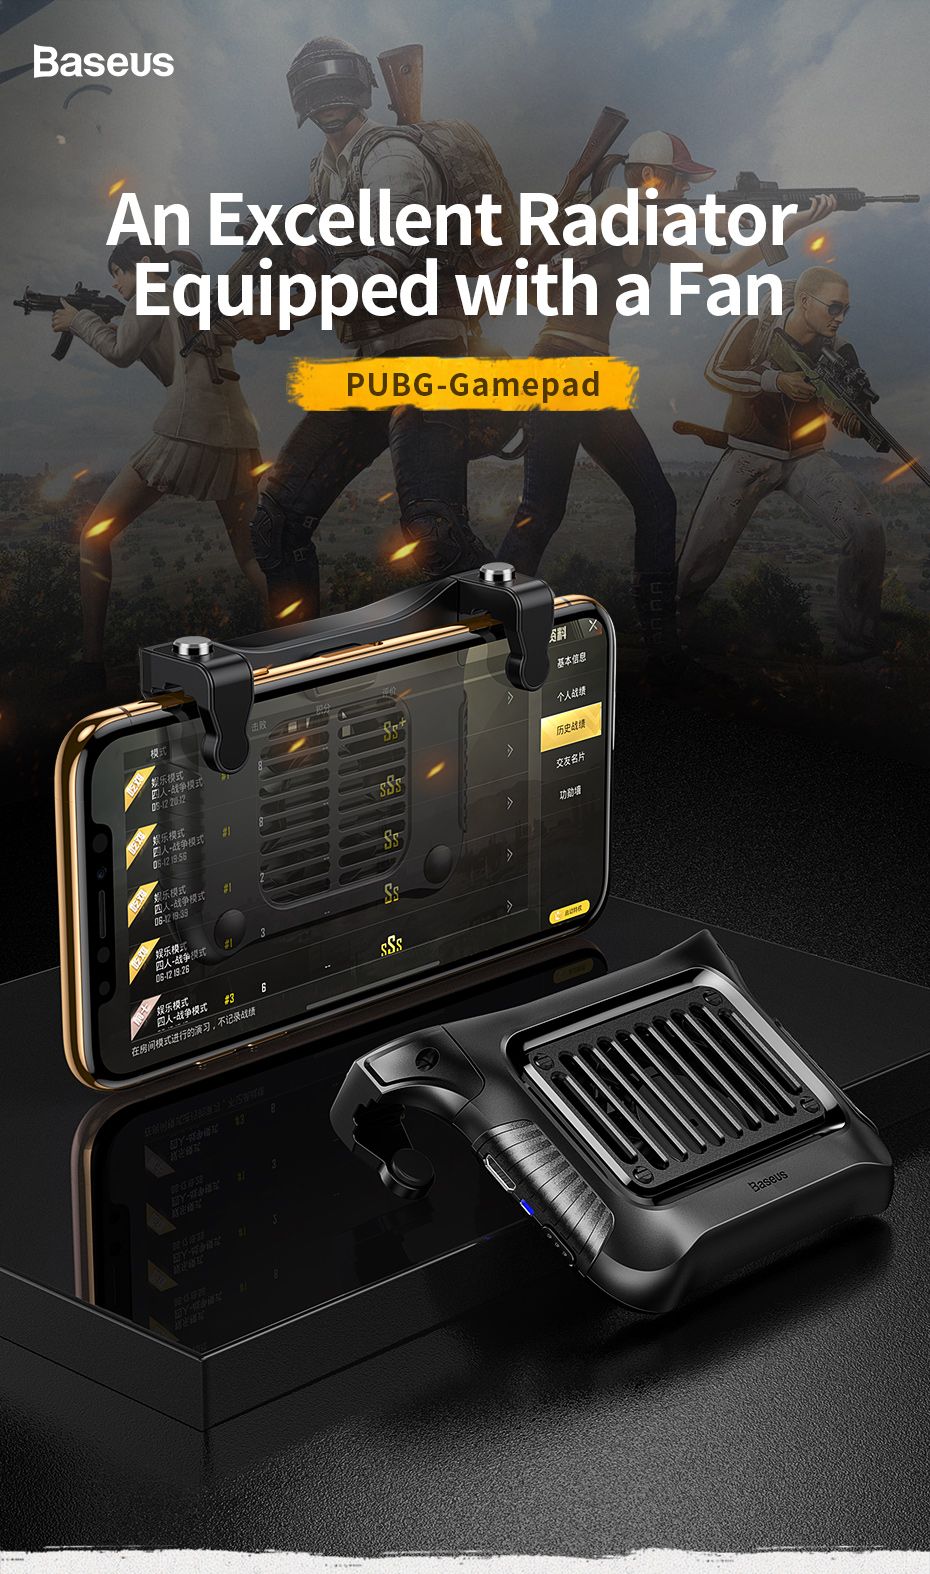 Baseus-Mobile-Phone-Gamdpad-Joystick-Game-Controller-With-Heat-Dissipation-Fan-For-Mobile-phone-PUG-1386186